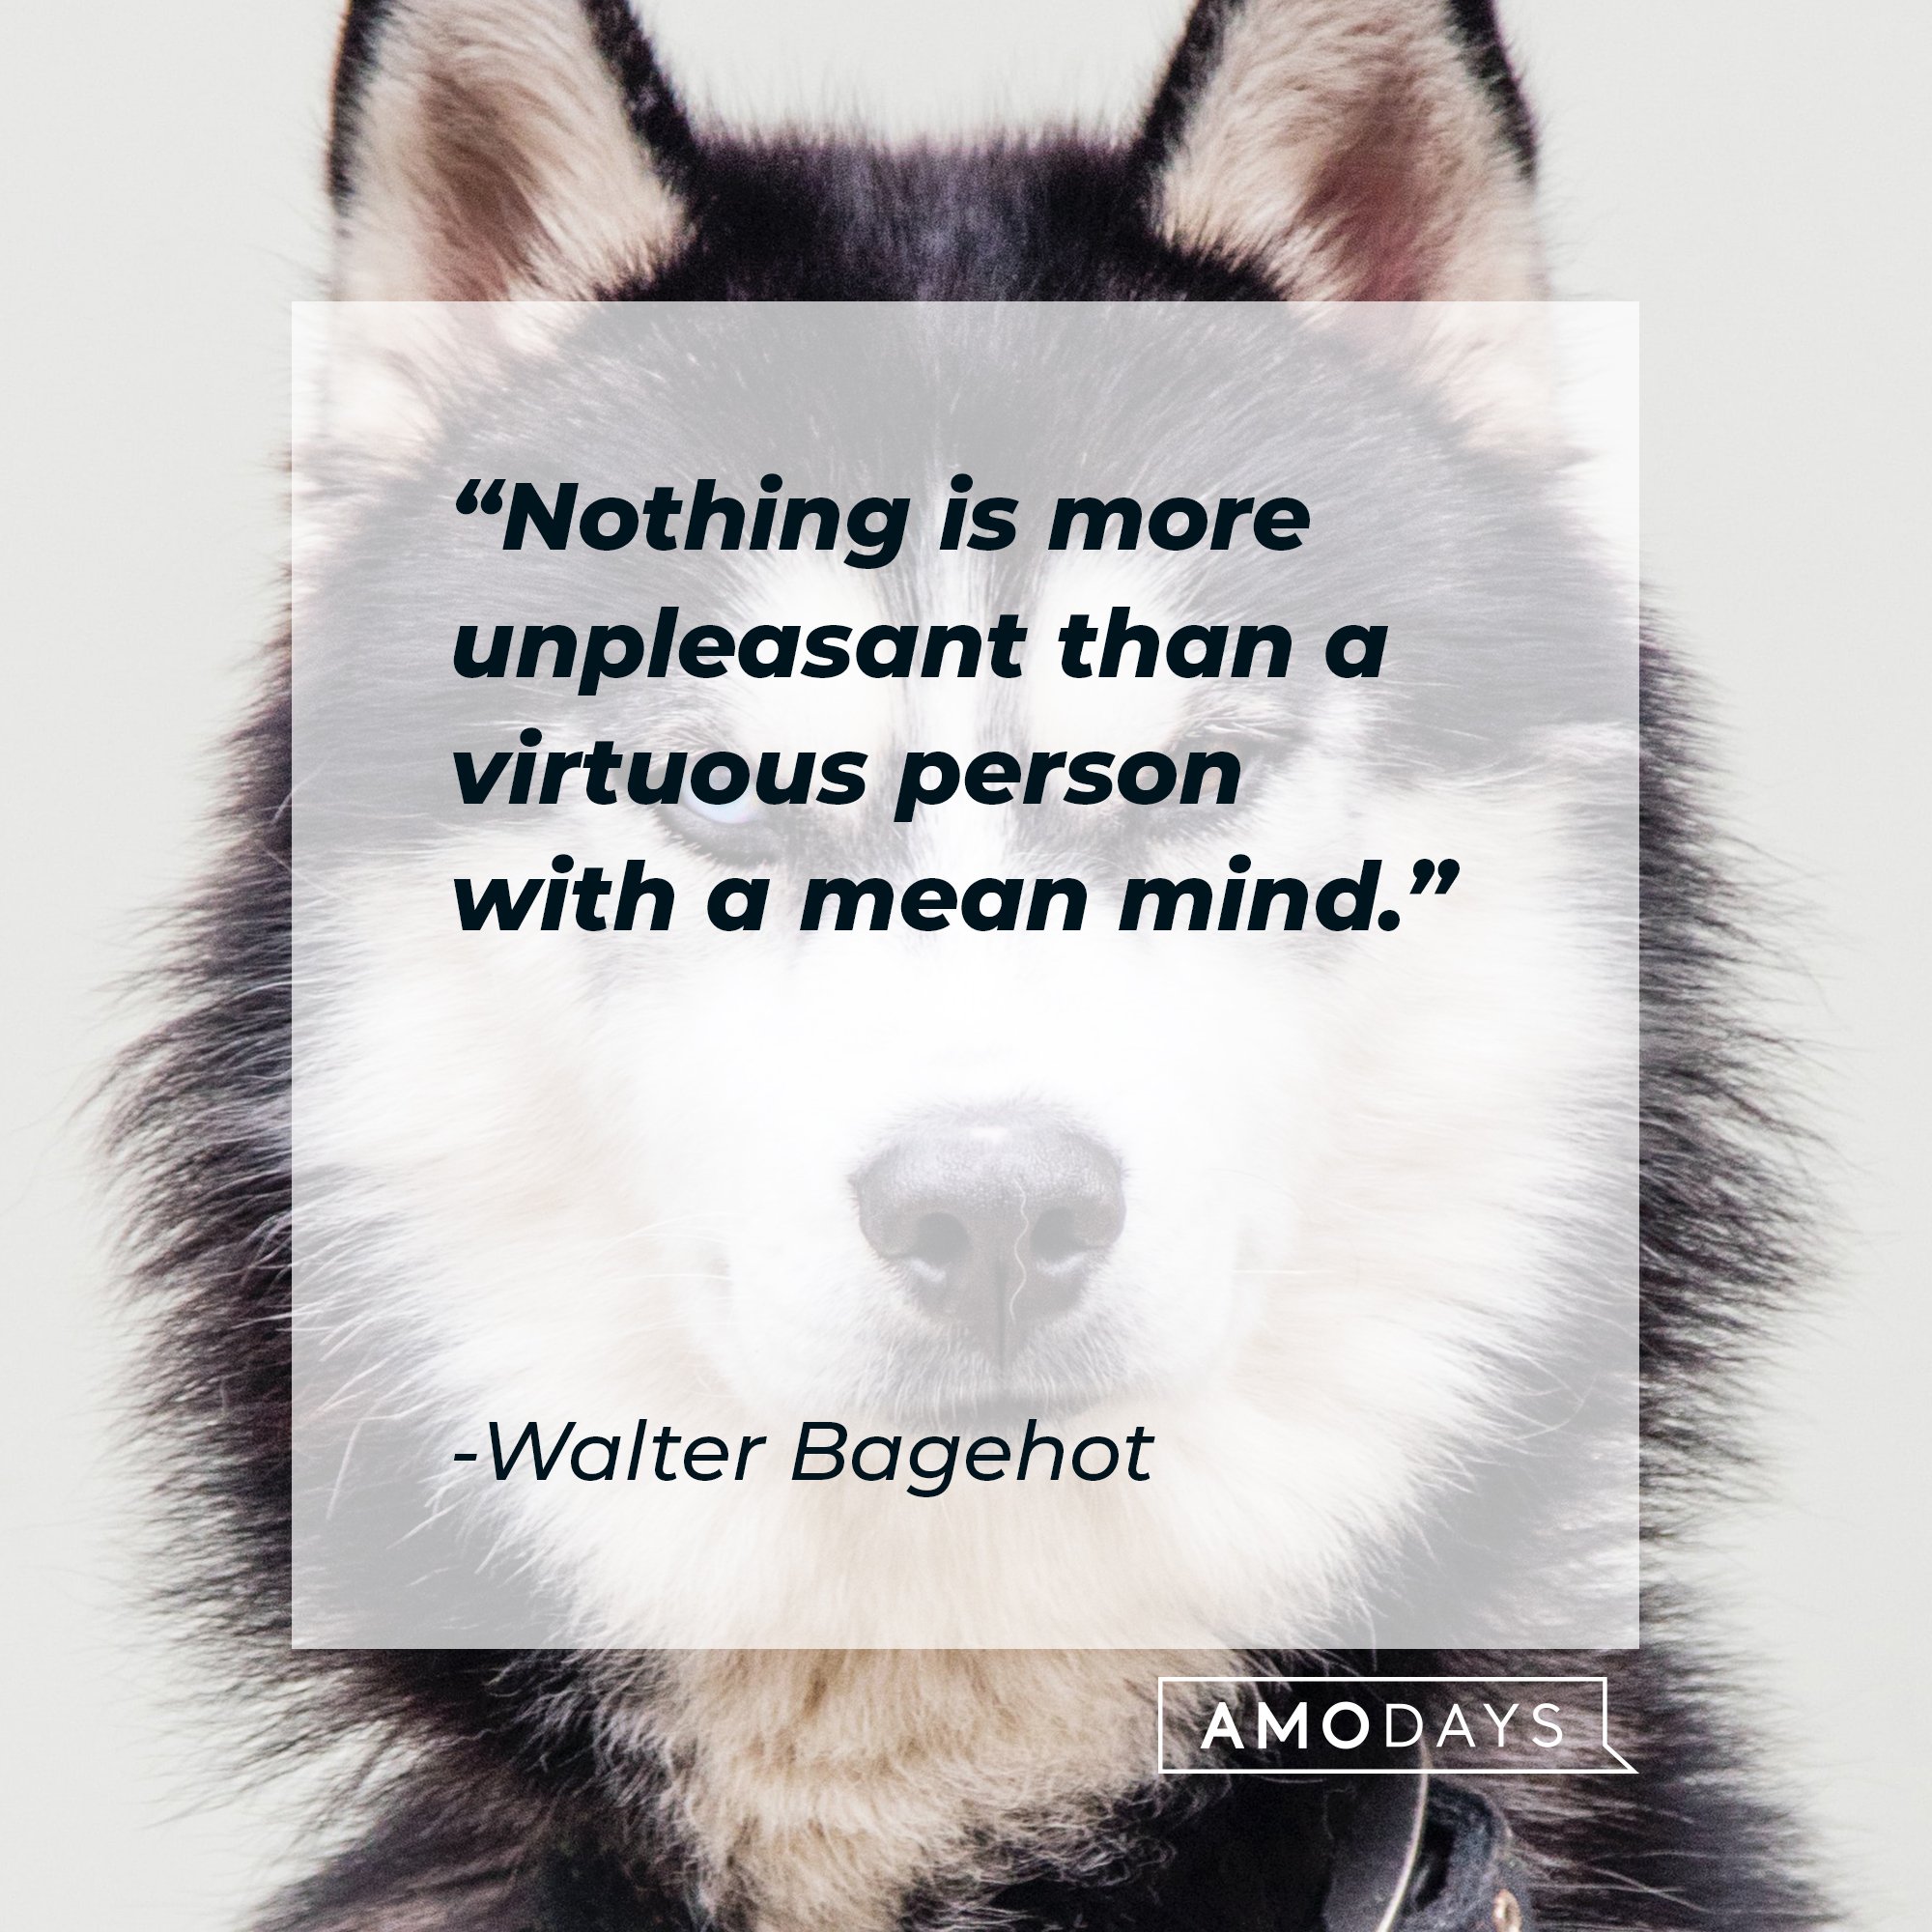 Walter Bagehot's quote: "Nothing is more unpleasant than a virtuous person with a mean mind." | Image: AmoDays